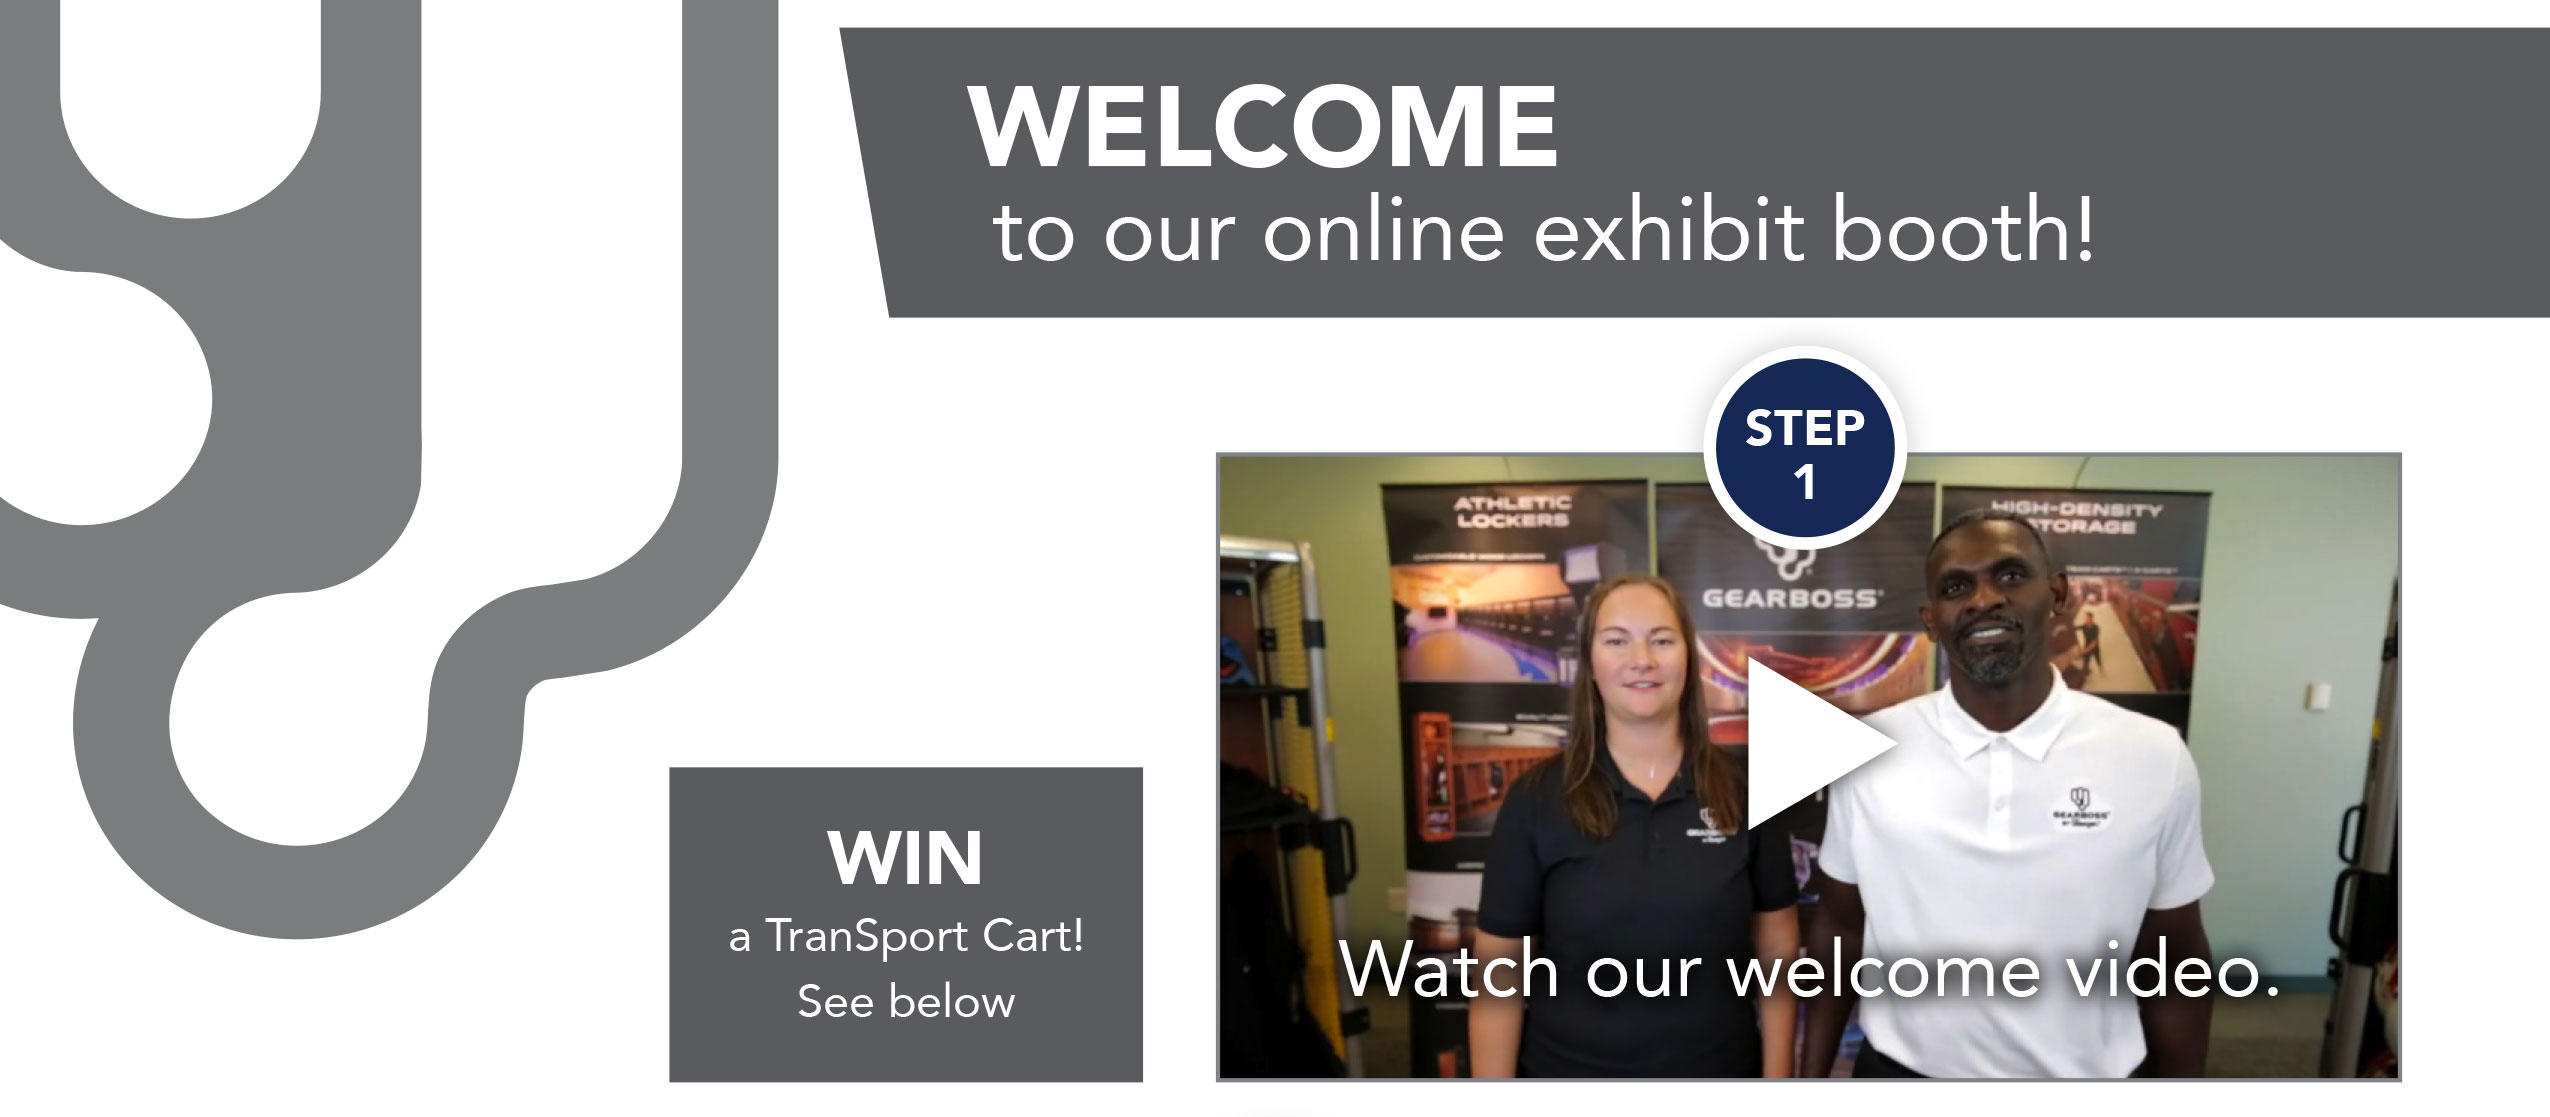 Step 1: Welcome to our online exhibit booth!